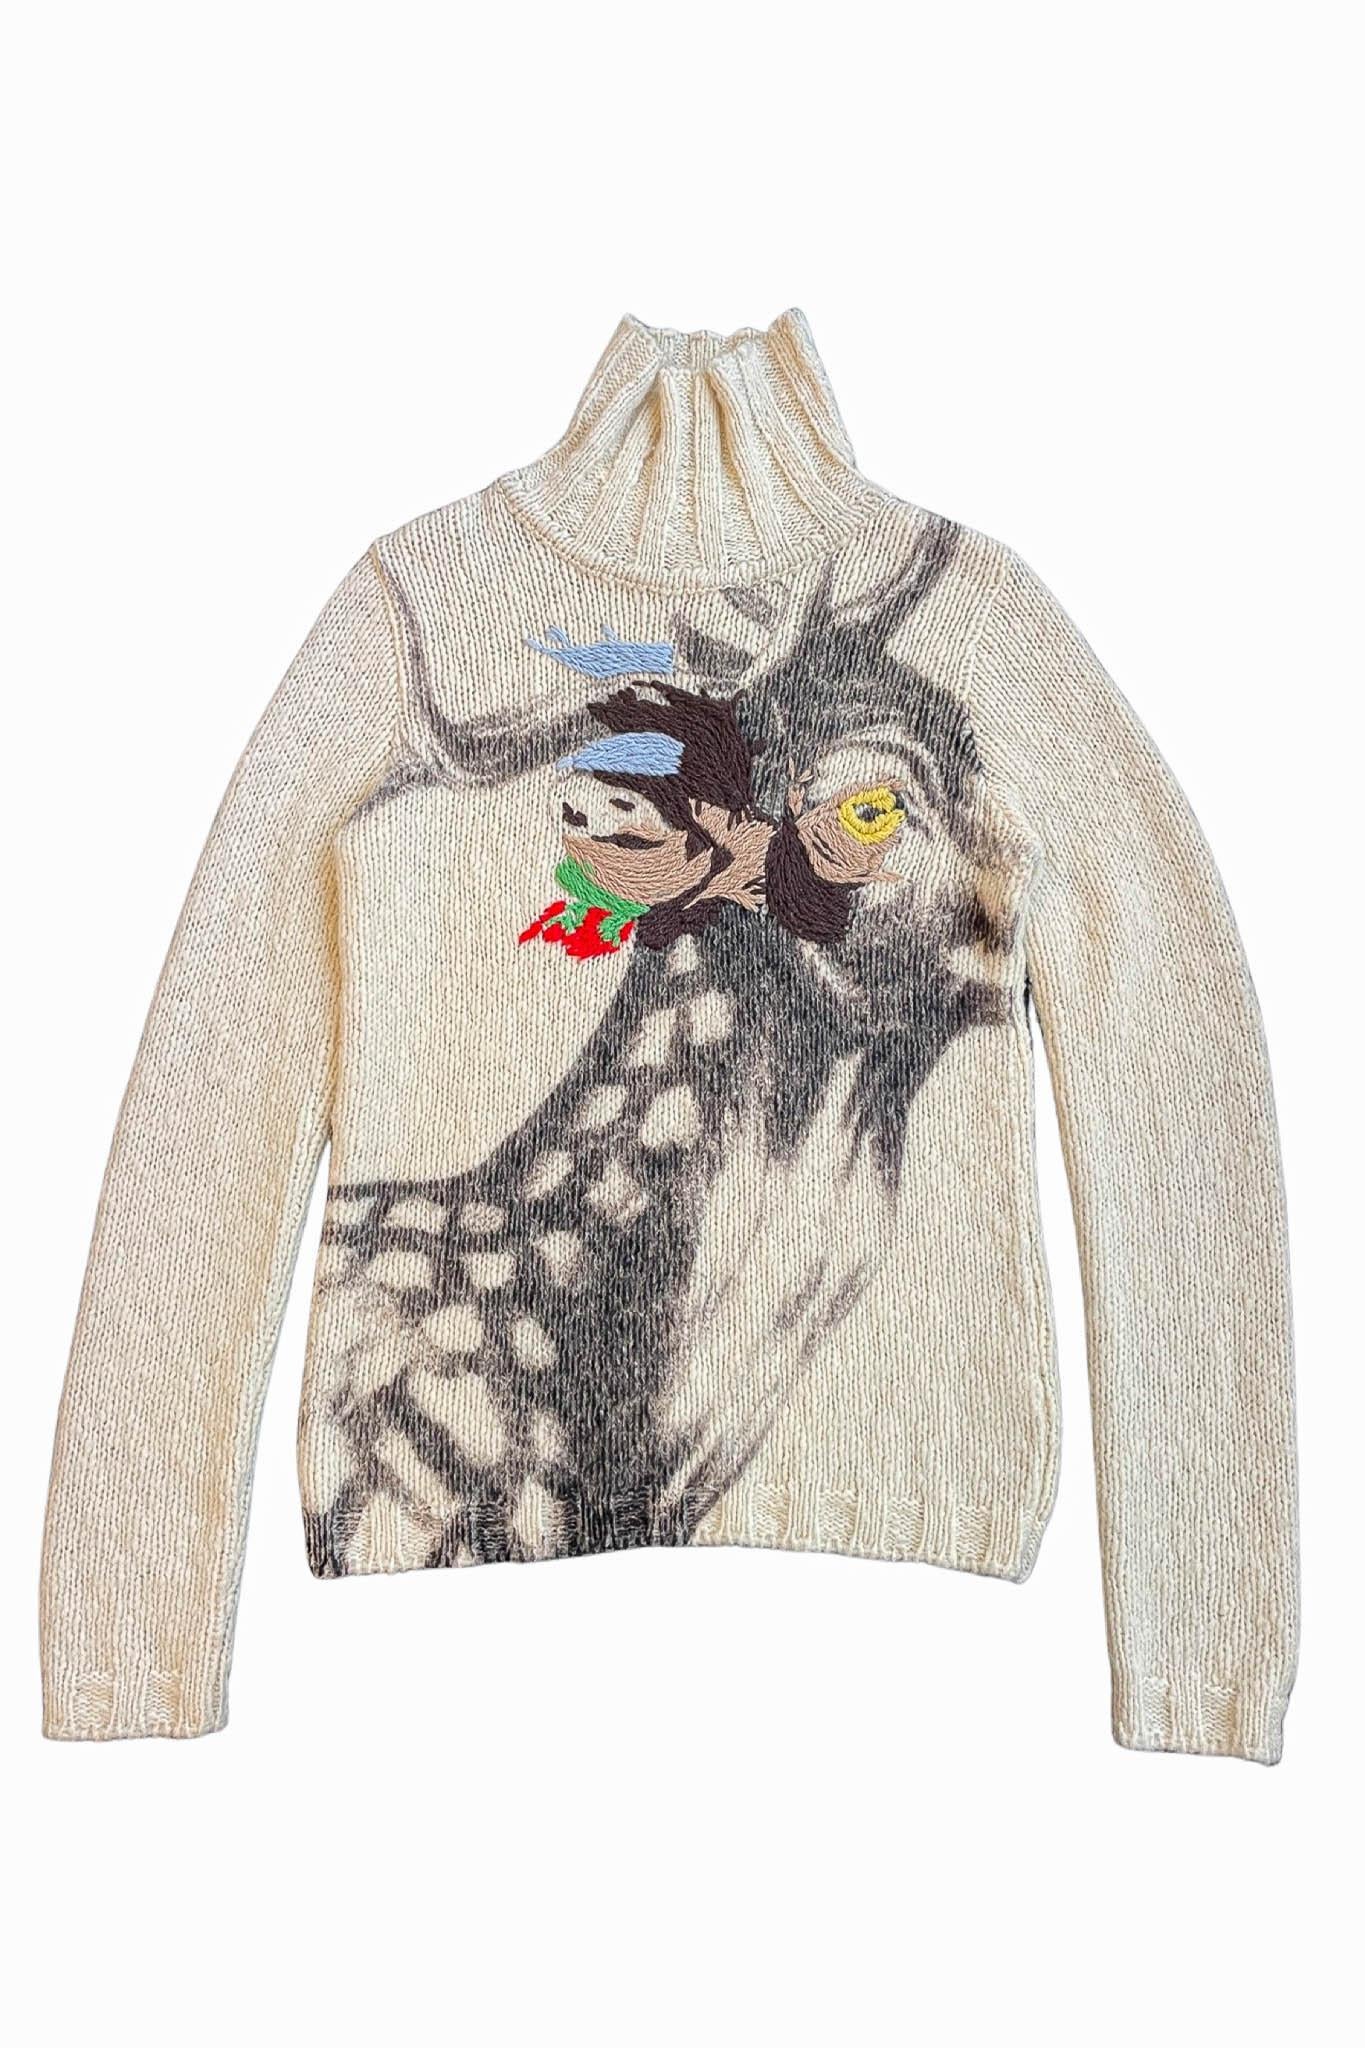 Resurrection Vintage is excited to offer a vintage Walt sweater featuring deer embroidery, a turtleneck, and long sleeves.

Walter Van Beirendonck
Size: Small
75% Wool, 25% Nylon
Excellent Vintage Condition 
Authenticity Guaranteed